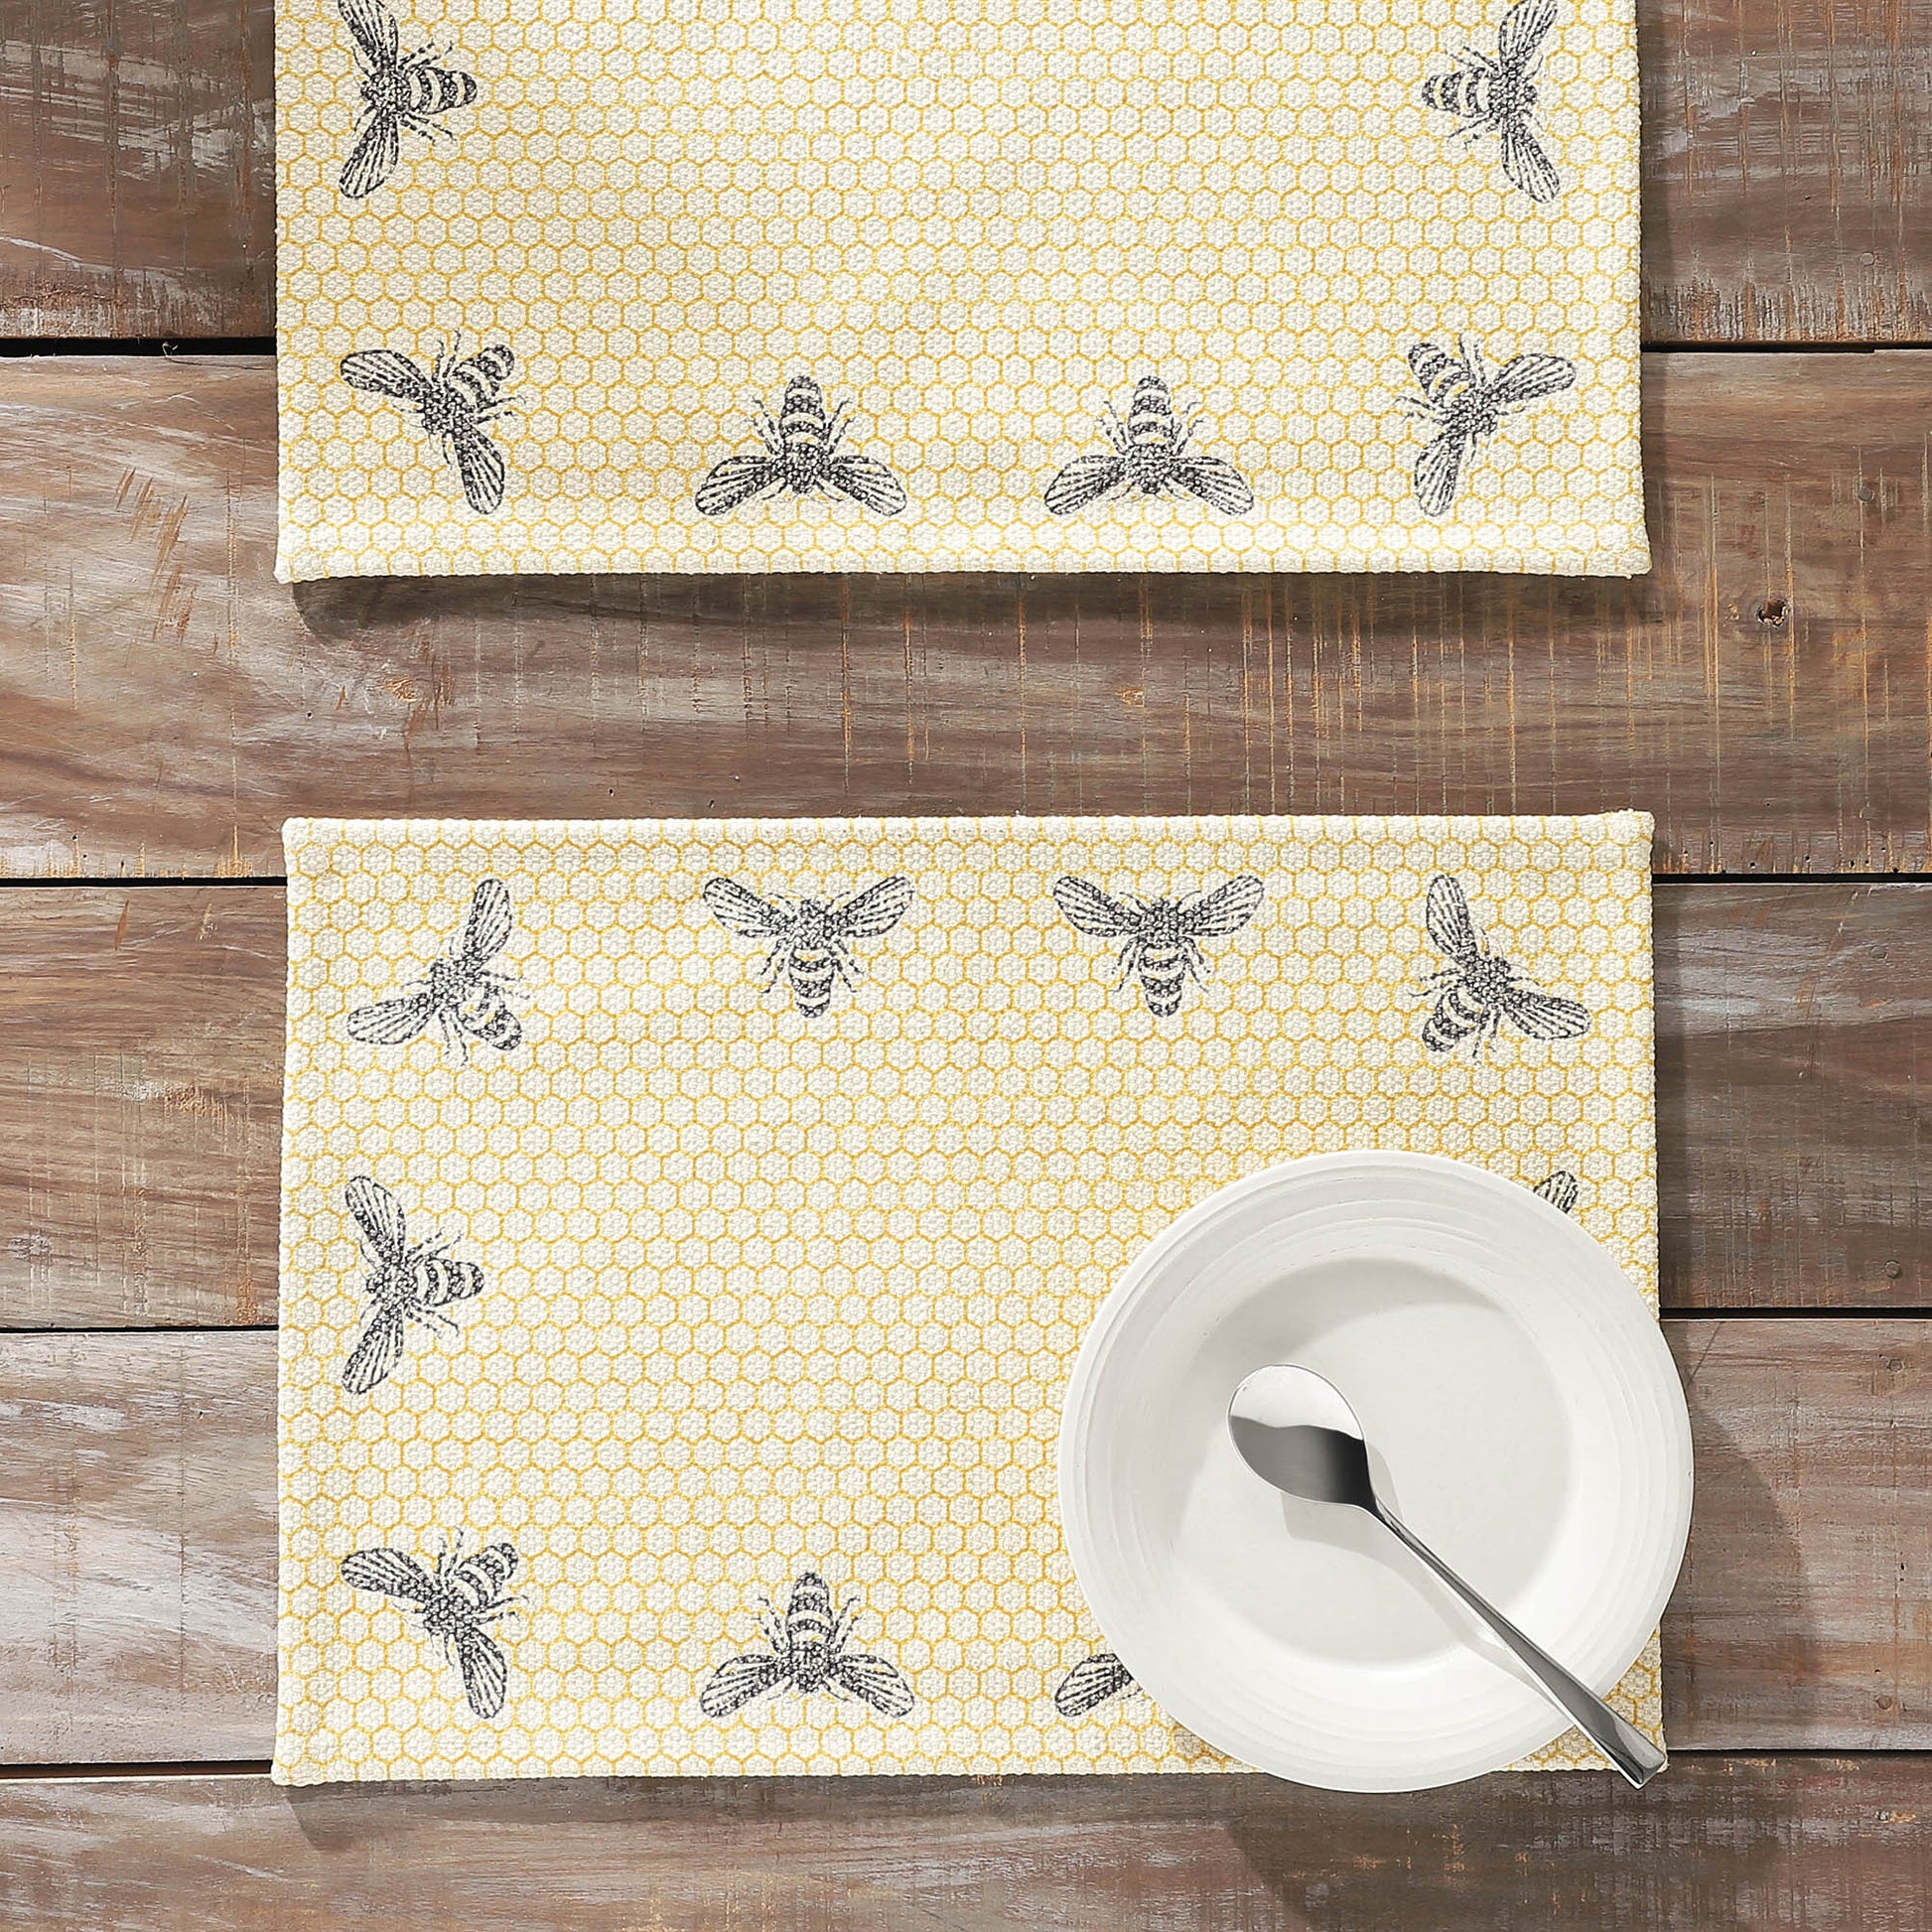 Buzzy Bees Placemat Set of 2 13x19 SpadezStore